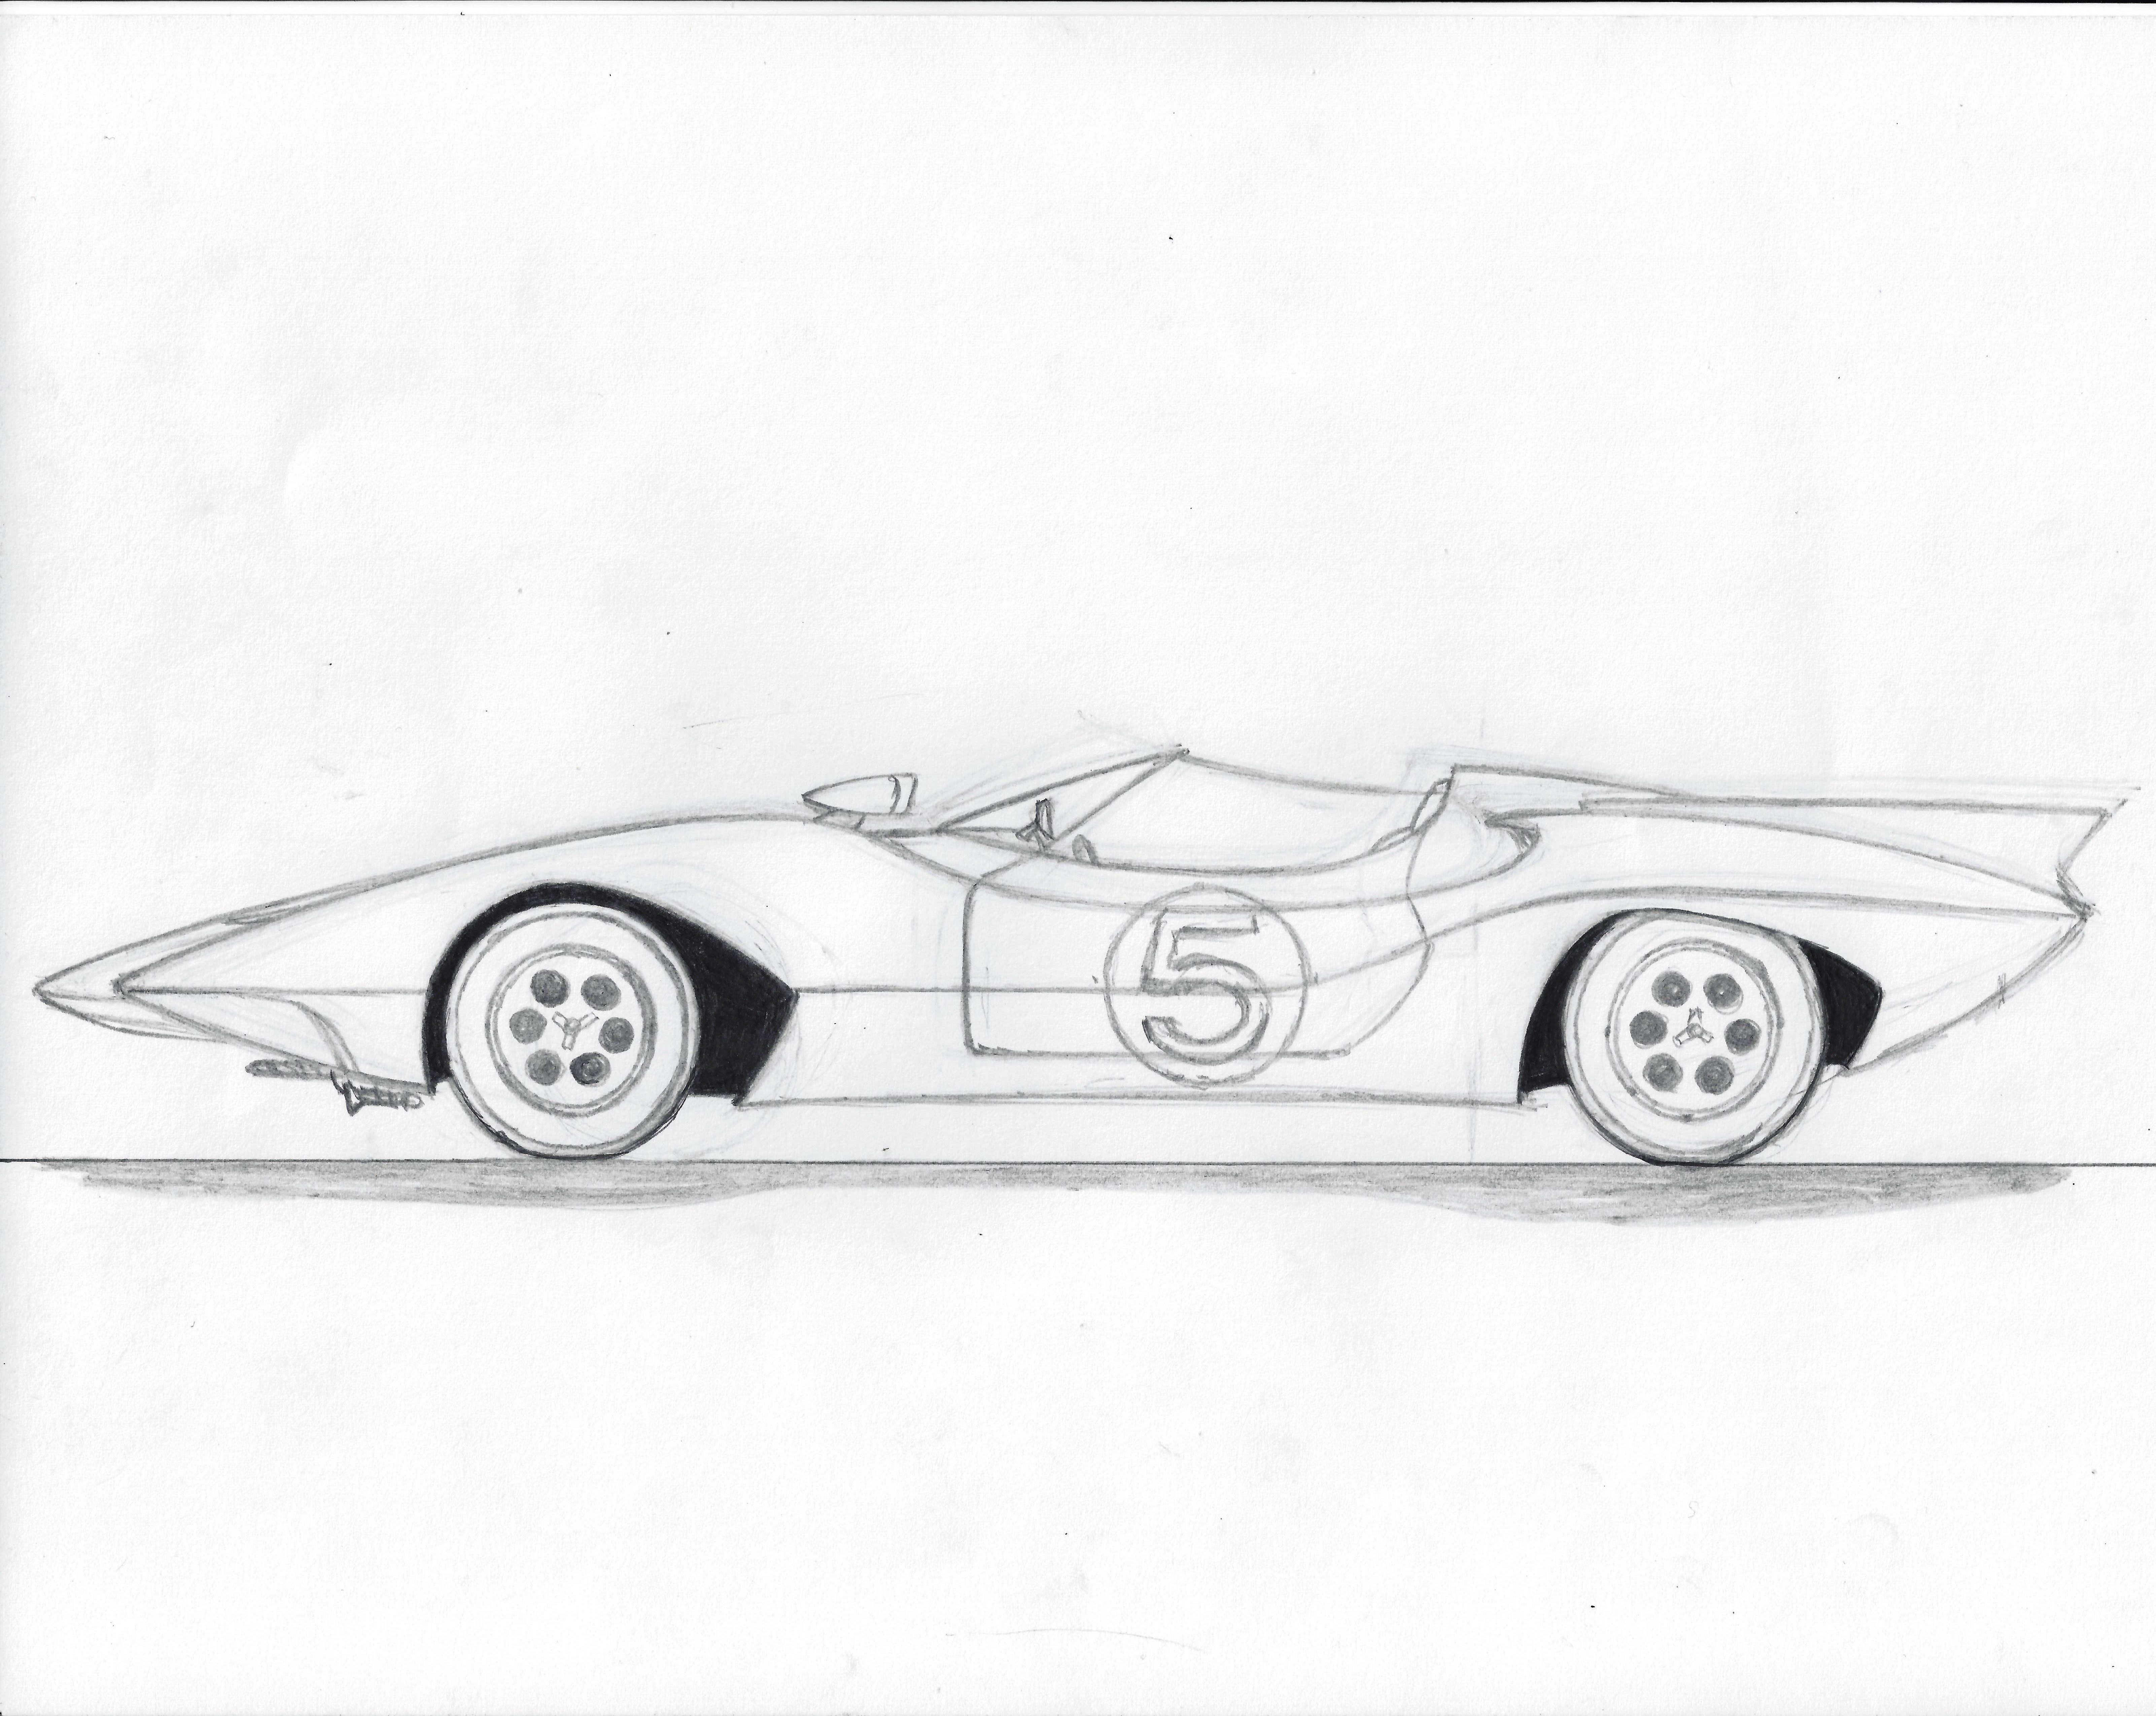 MACH 5 Graphic by Jerome-K-Moore on deviantART